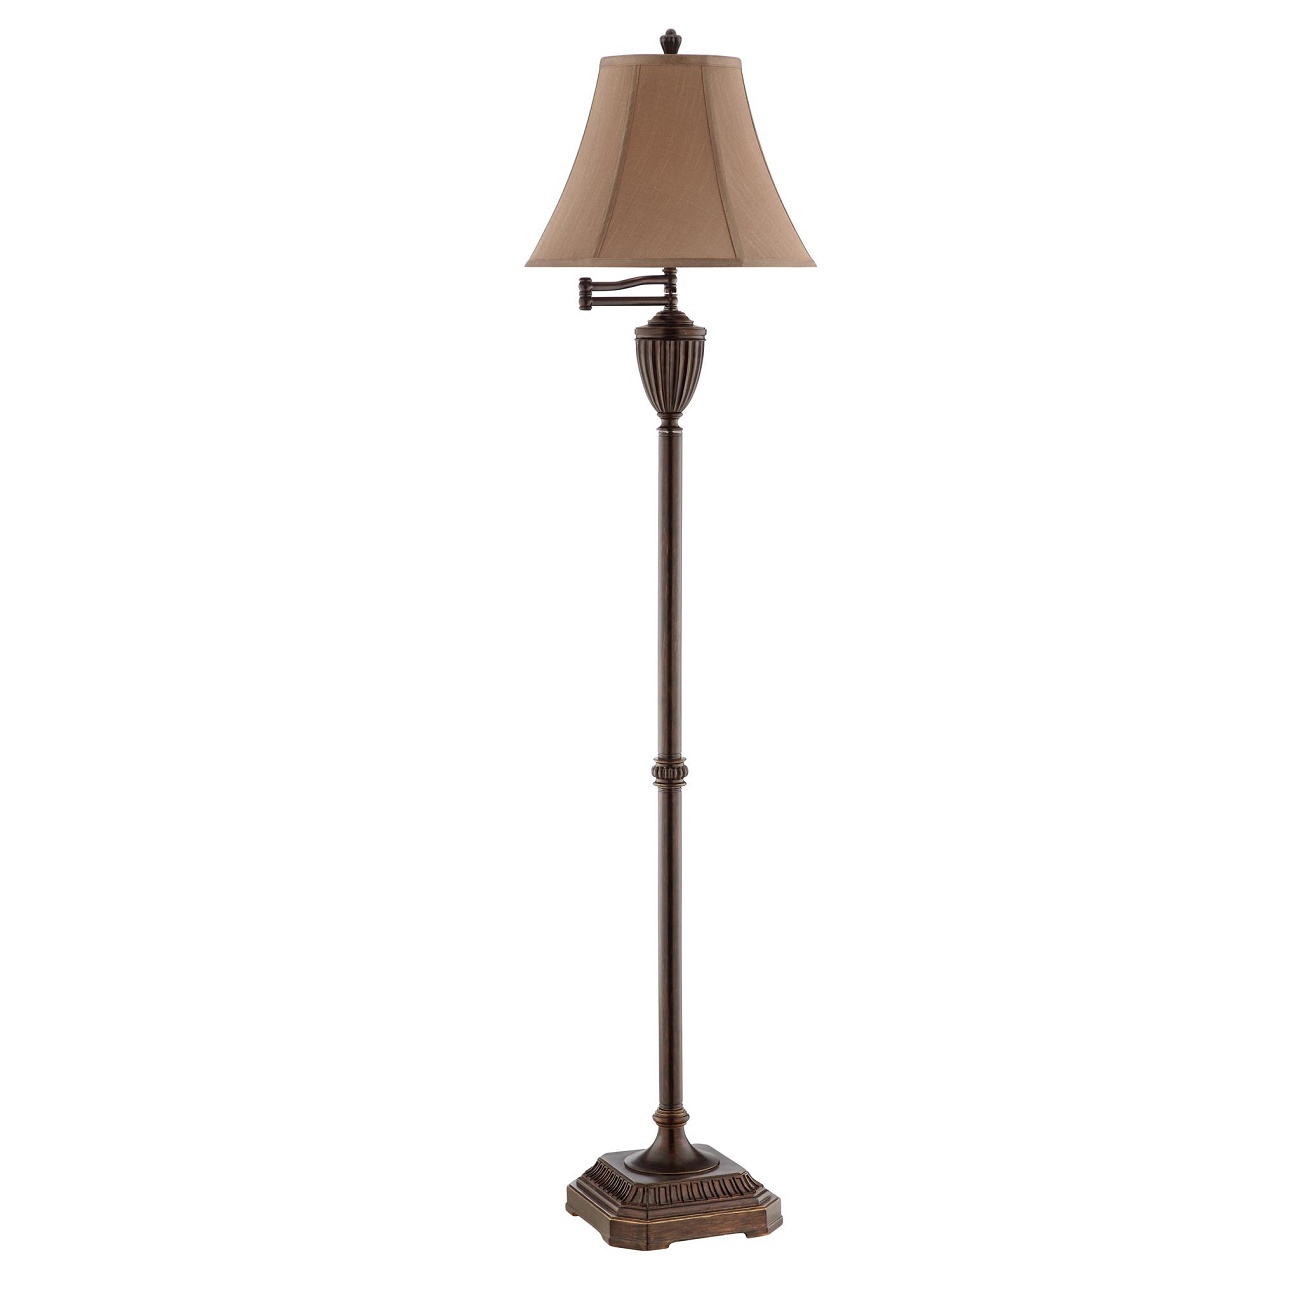 Stein World Roderick Floor Lamp Table Lamps Brooklyn,New York - Accentuations Brand